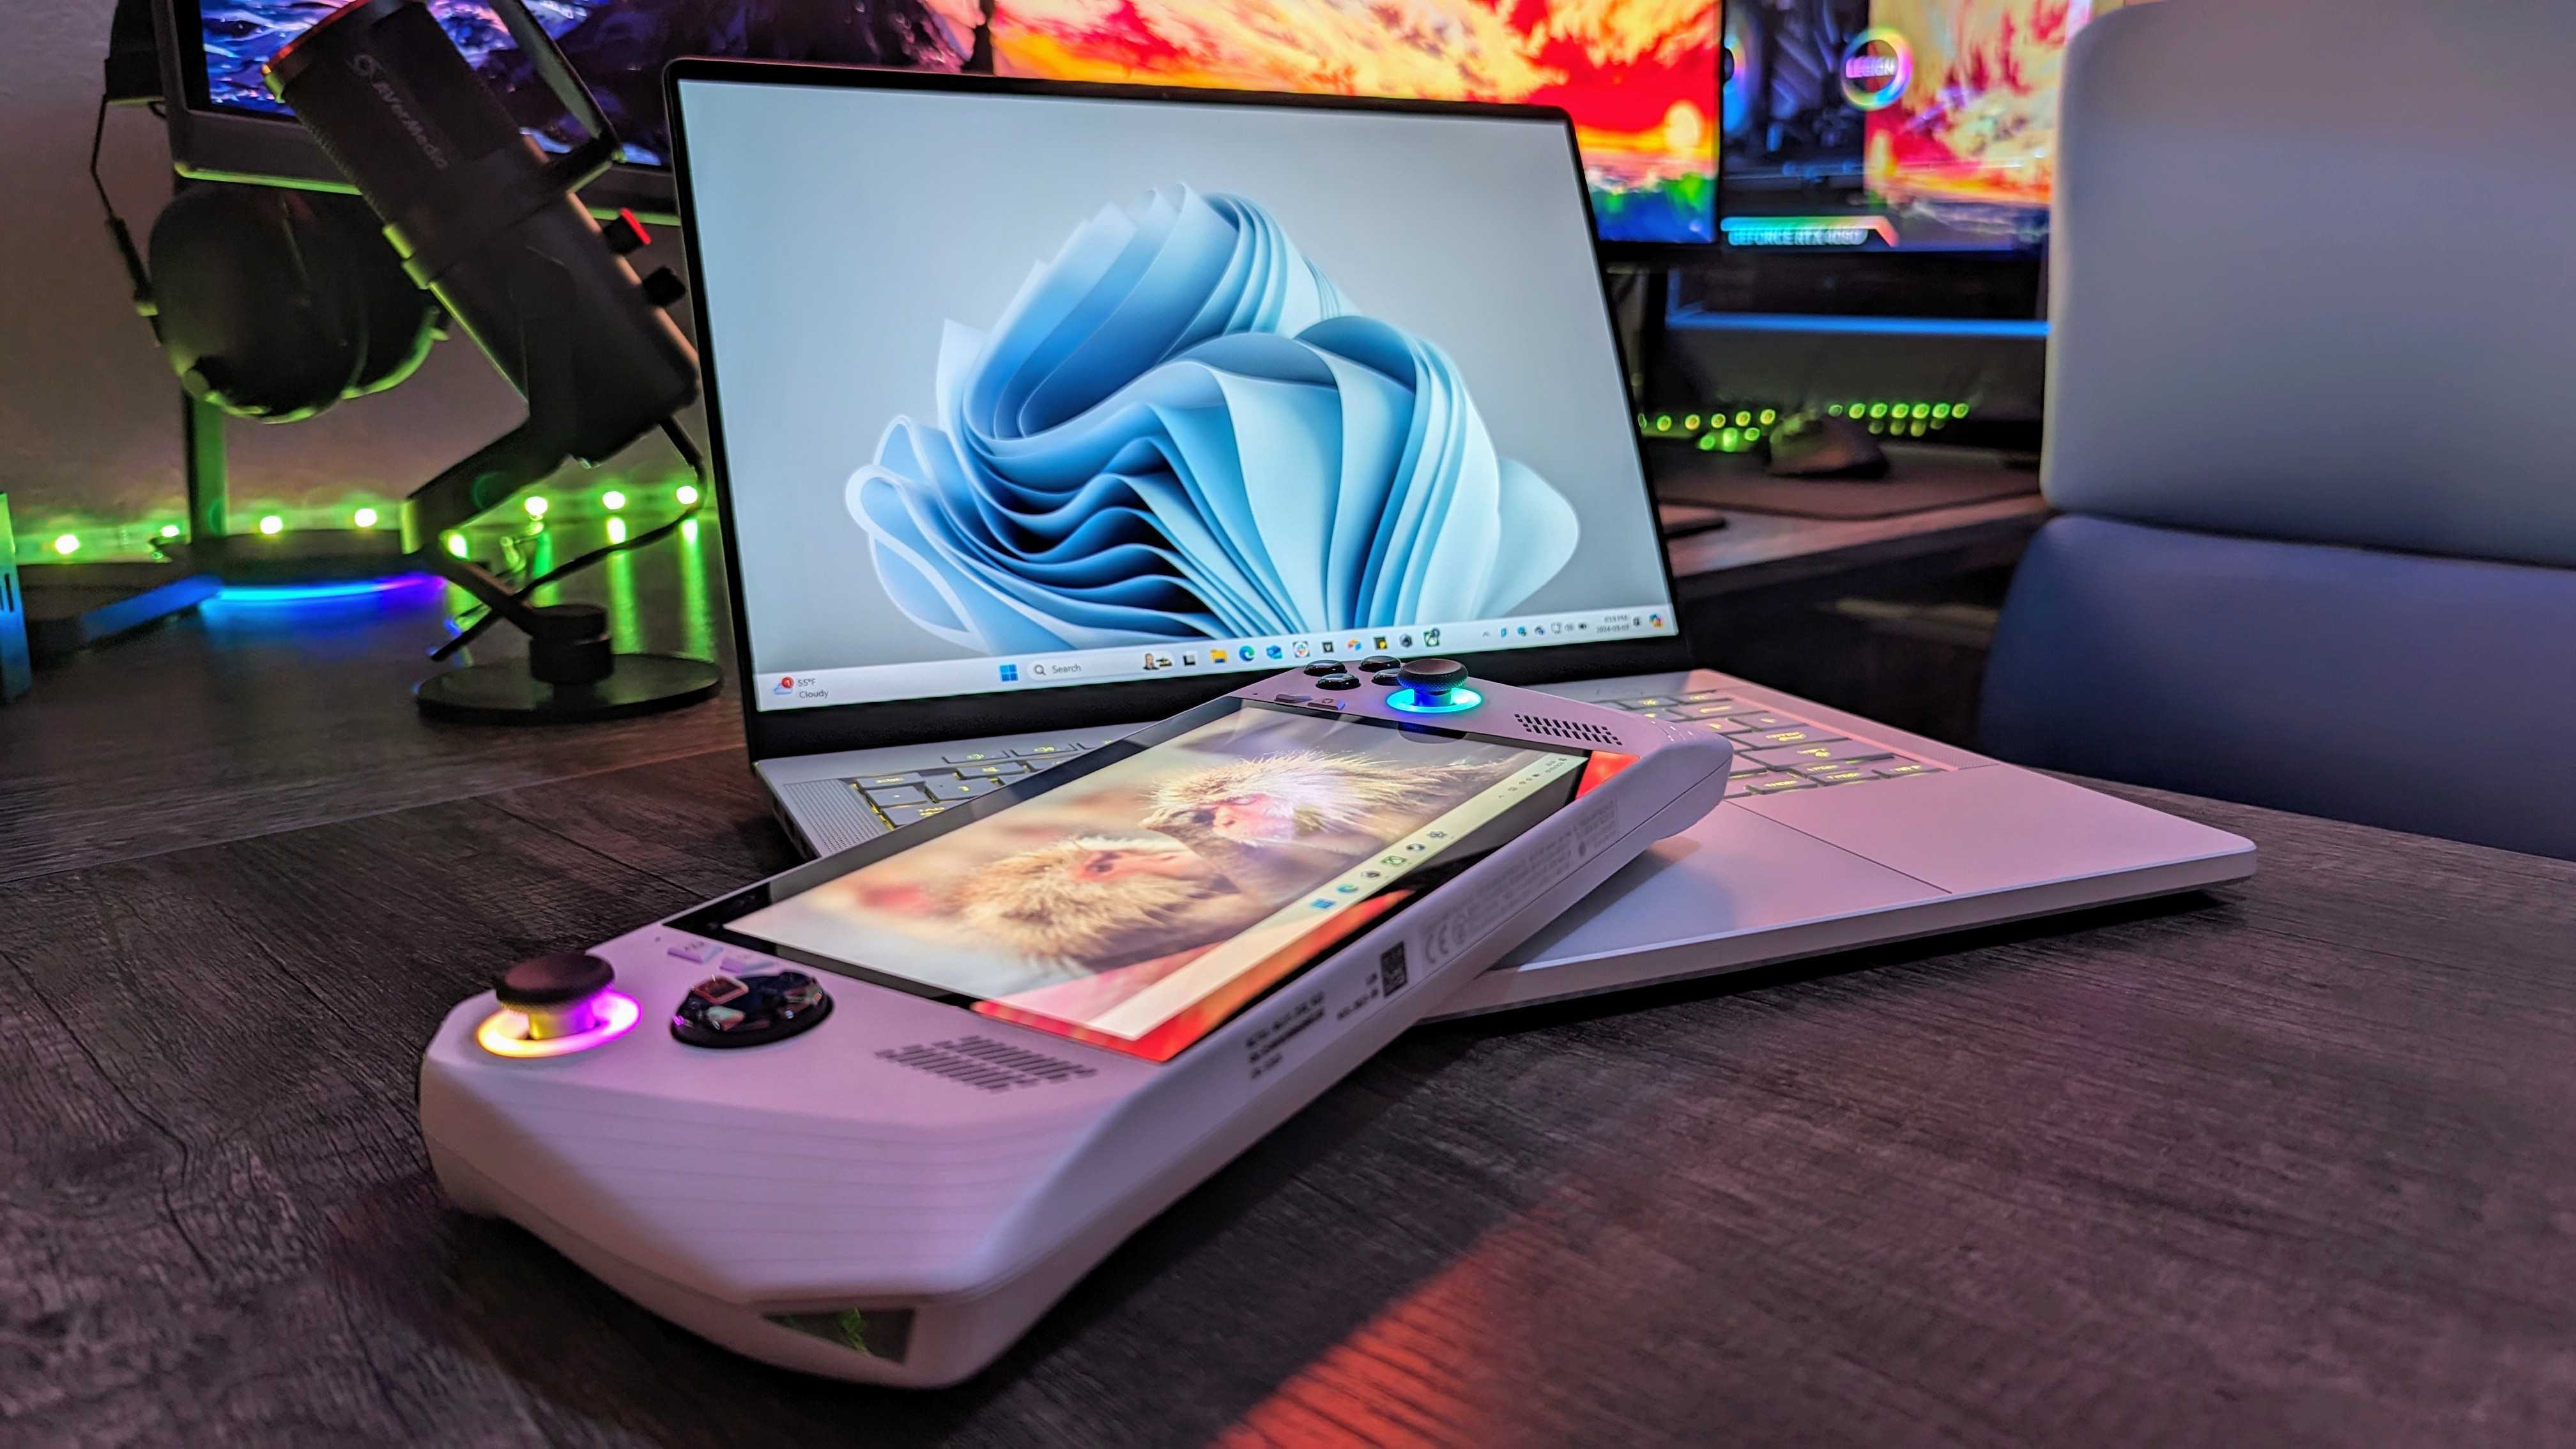 Laptop vs. handheld: Which portable device should you choose for PC gaming?